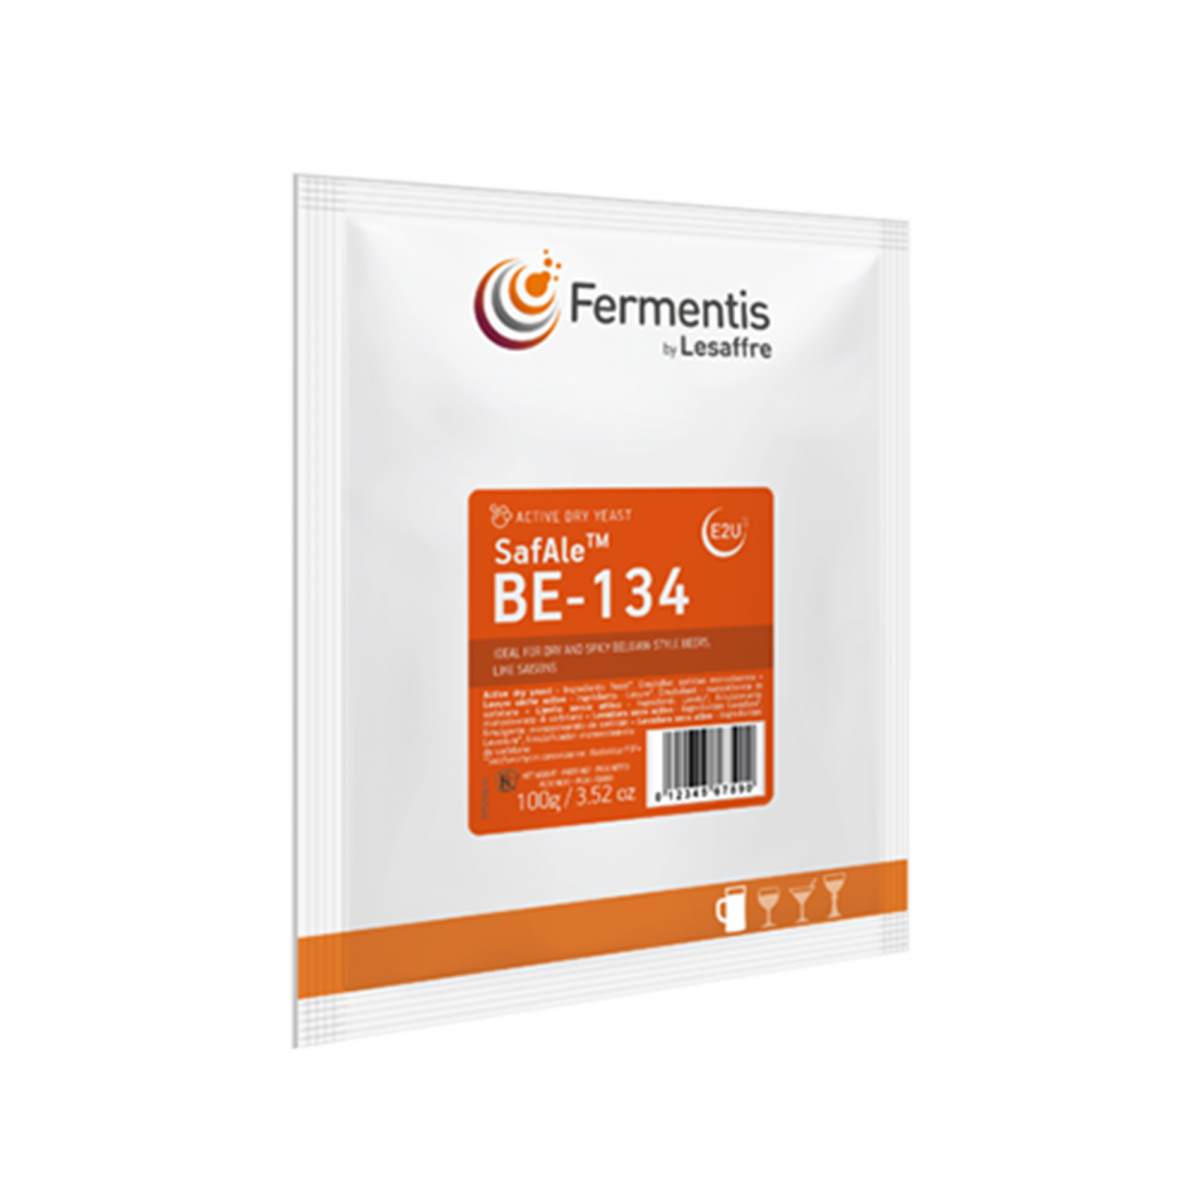 Fermentis dried brewing yeast SafAle BE-134 100 g